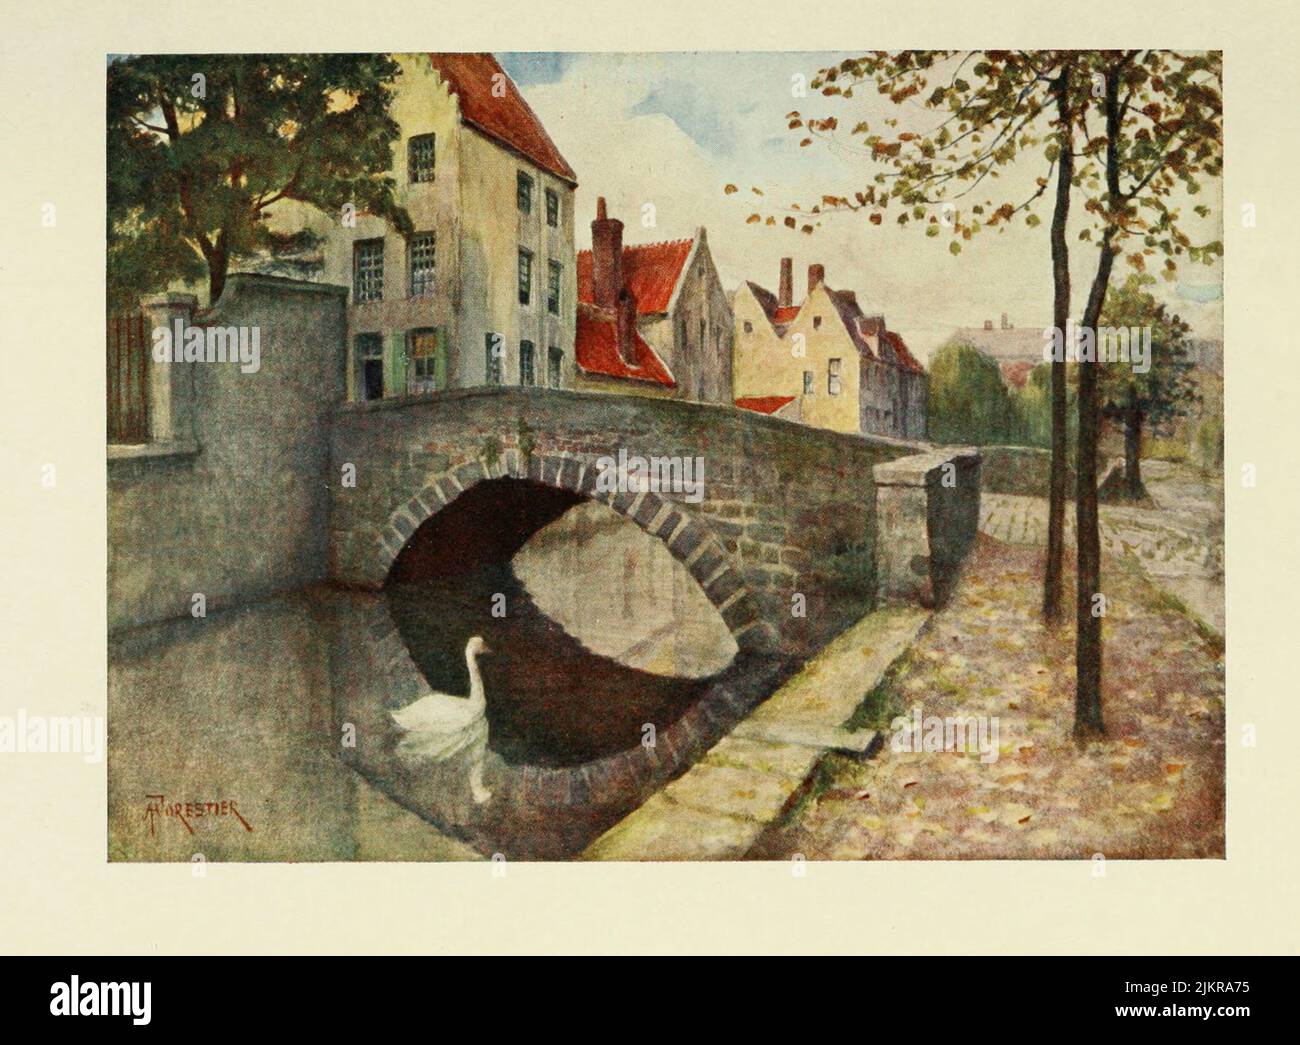 Bruges : Quai des Marbriers Painted by Amedee Forestier, from the book '  Bruges and West Flanders ' by George William Thomson Omond, Publication date 1906 Publisher London : A. & C. Black Sir Amédée Forestier (Paris 1854 – 18 November 1930 London) was an Anglo-French artist and illustrator who specialised in historical and prehistoric scenes, and landscapes. Stock Photo